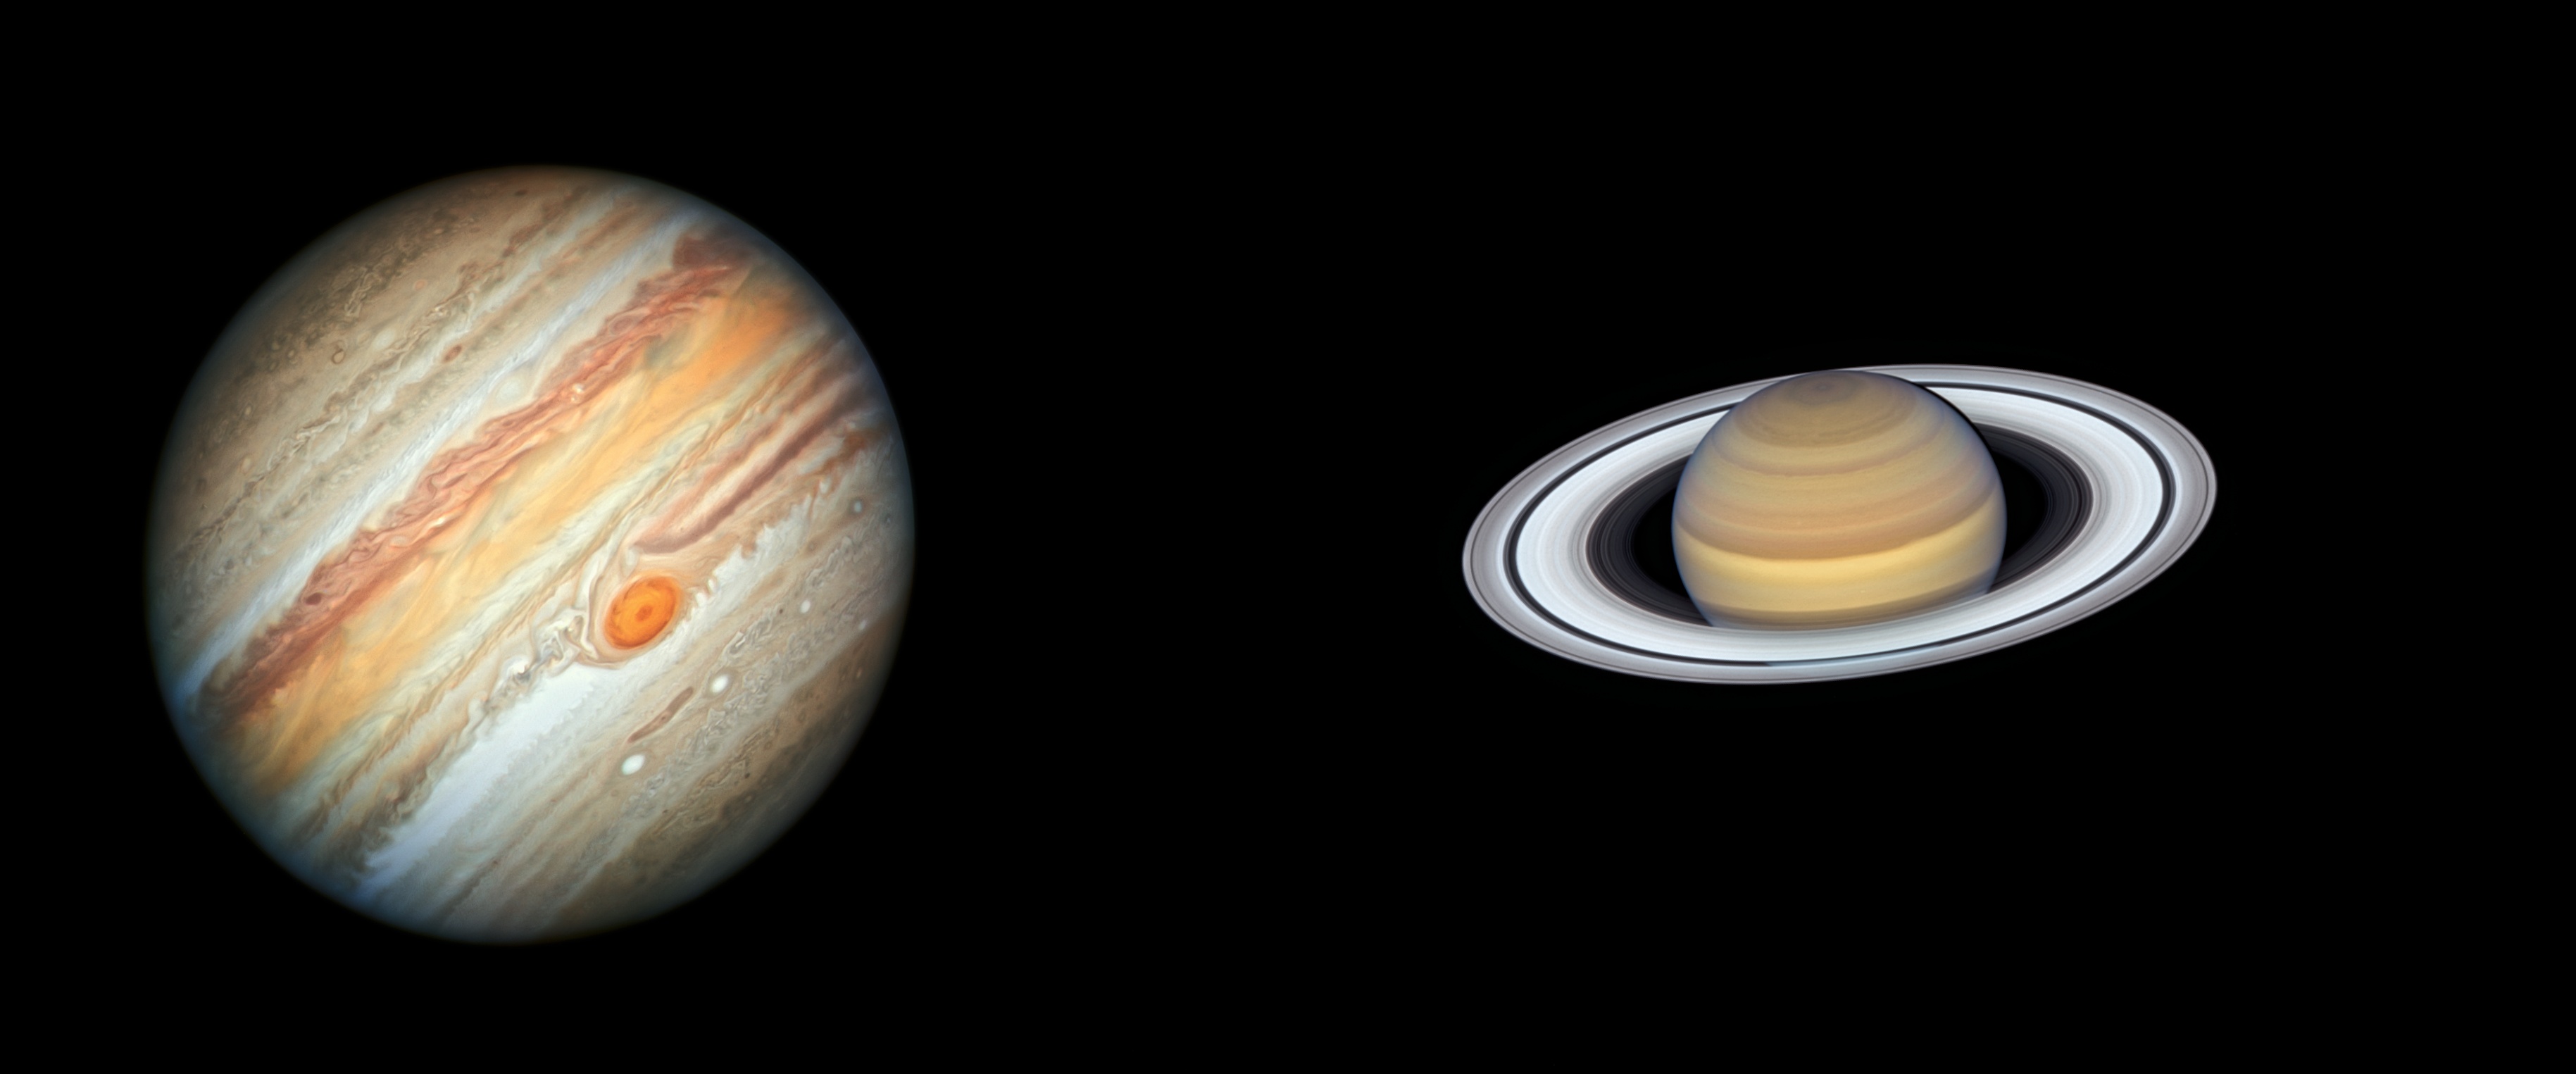 Jupiter Saturn will look like a double planet in rare celestial event